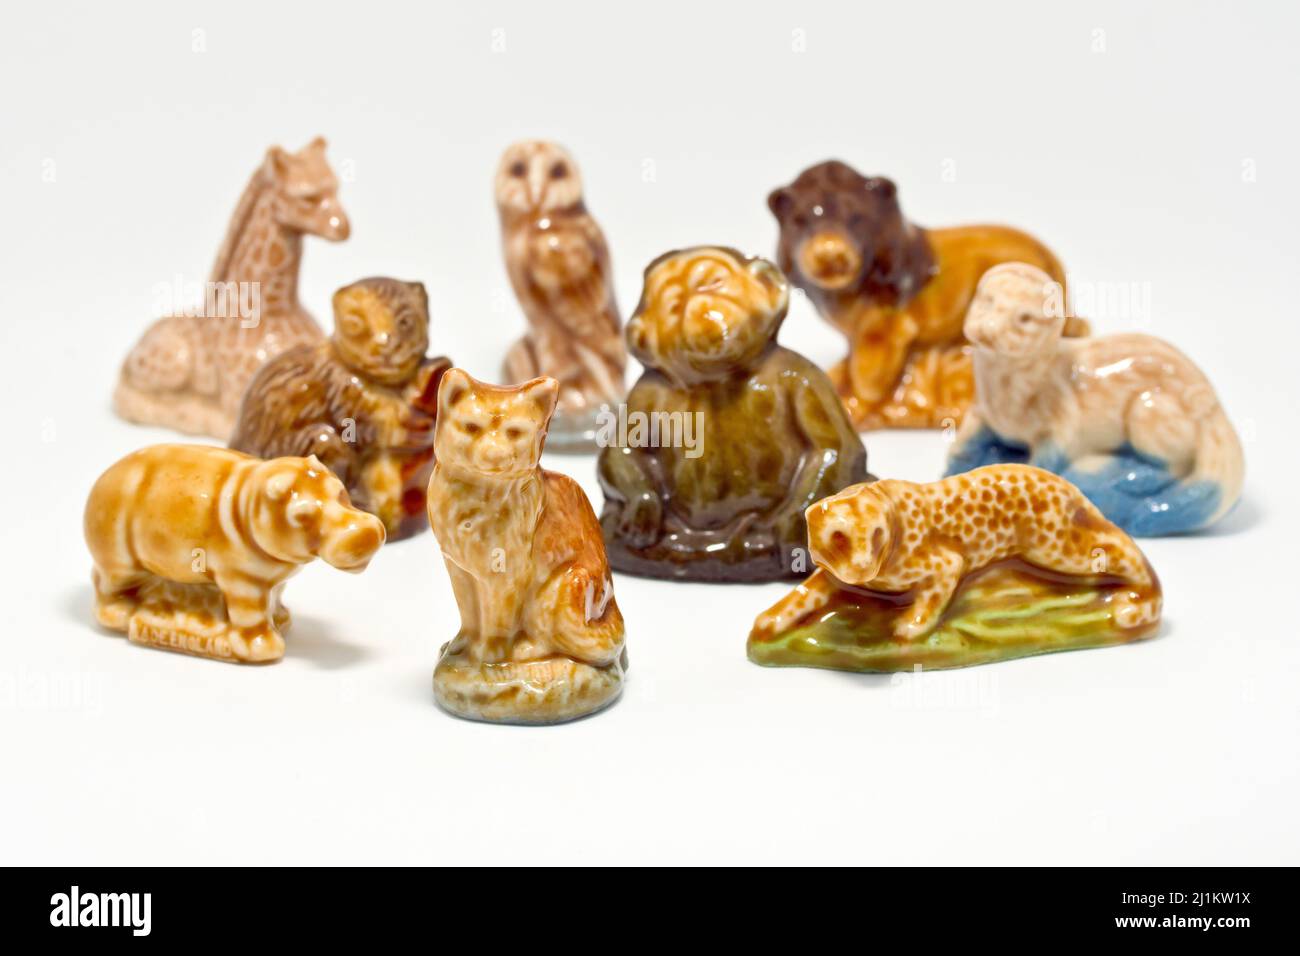 Close up of a collection of Wade Whimsies, small porcelain animal figurines popular with collectors since the 1950s, against a white background. Stock Photo